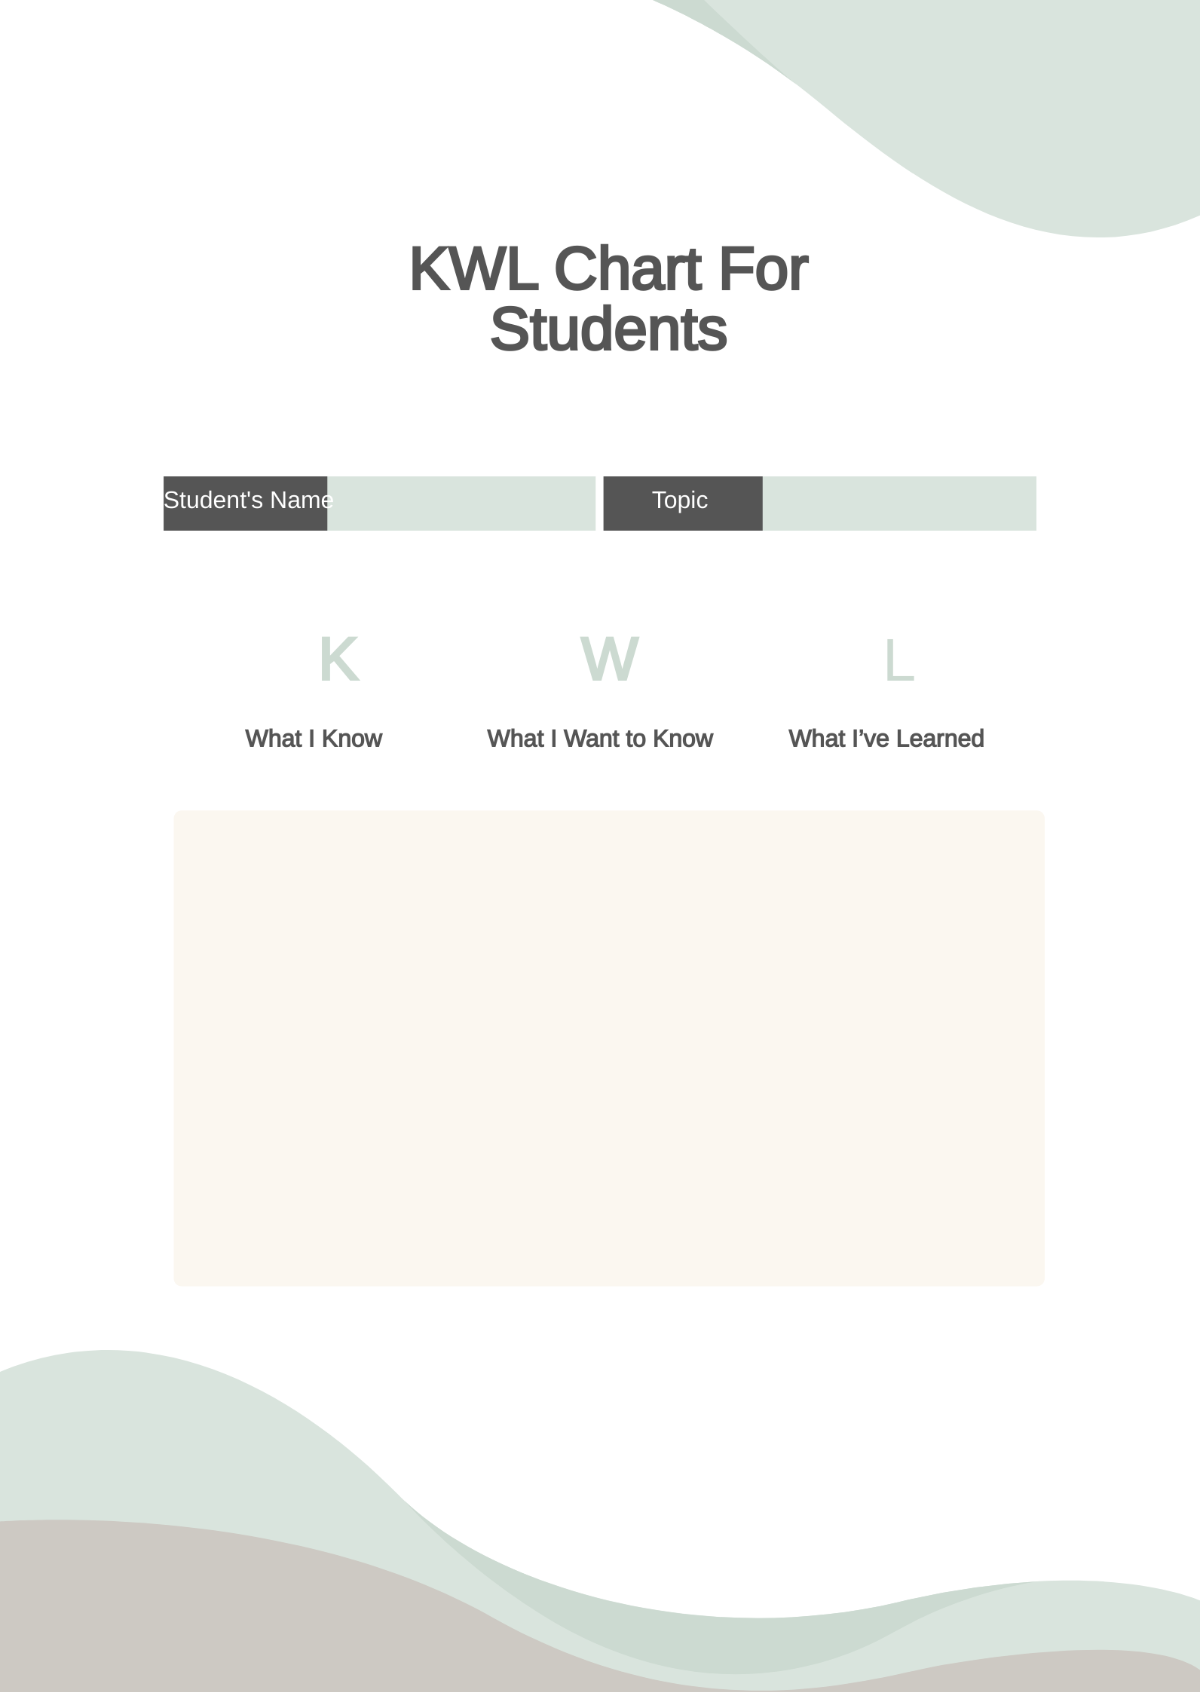 KWL Chart For Students Template